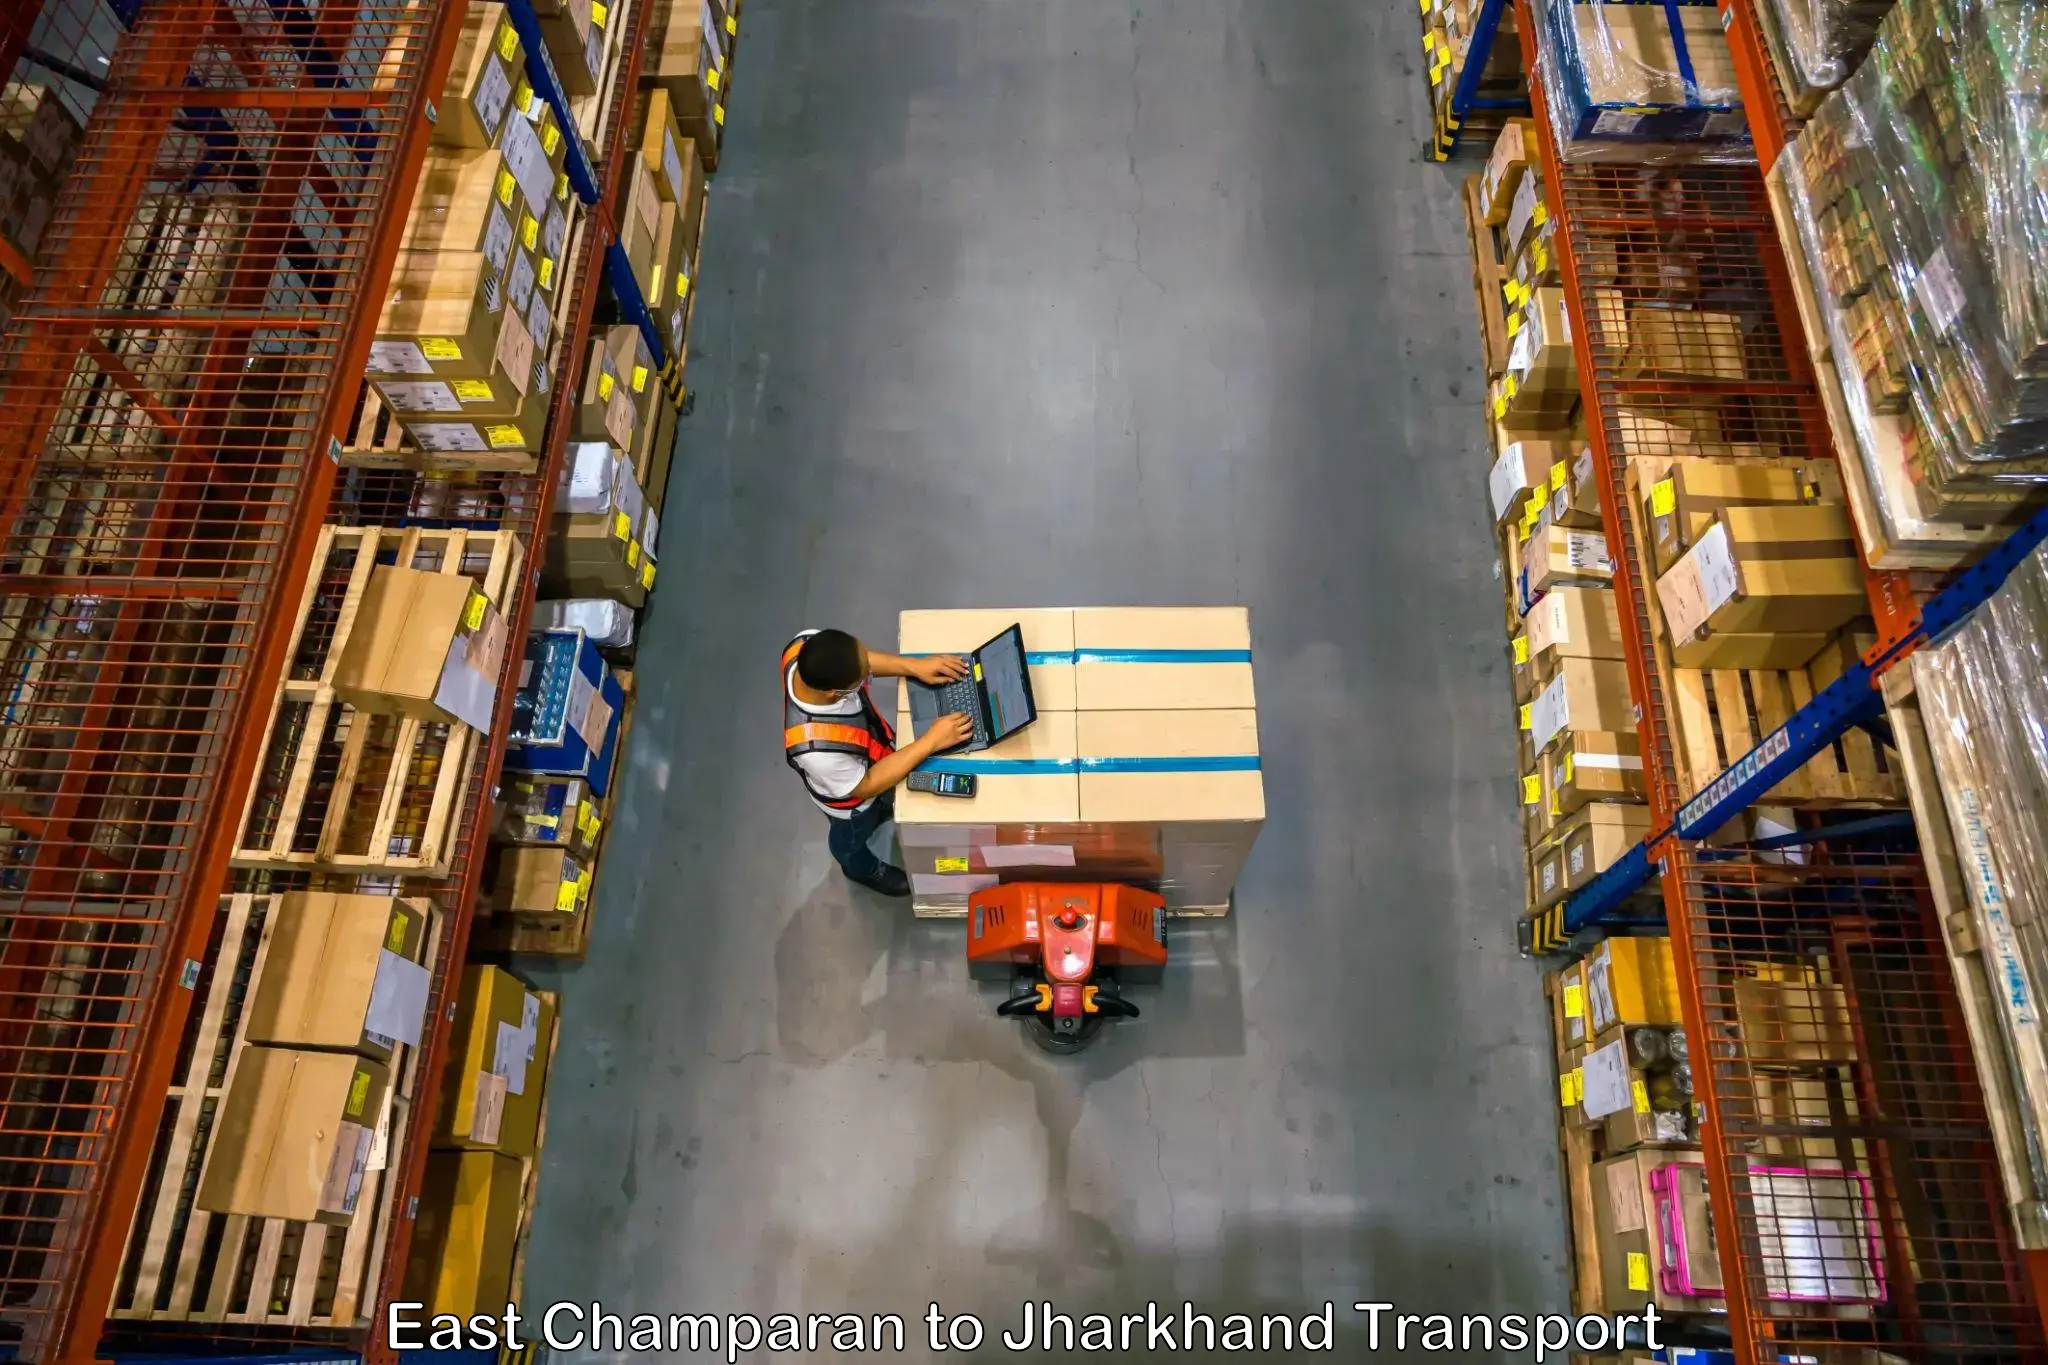 Container transport service East Champaran to Dhanbad